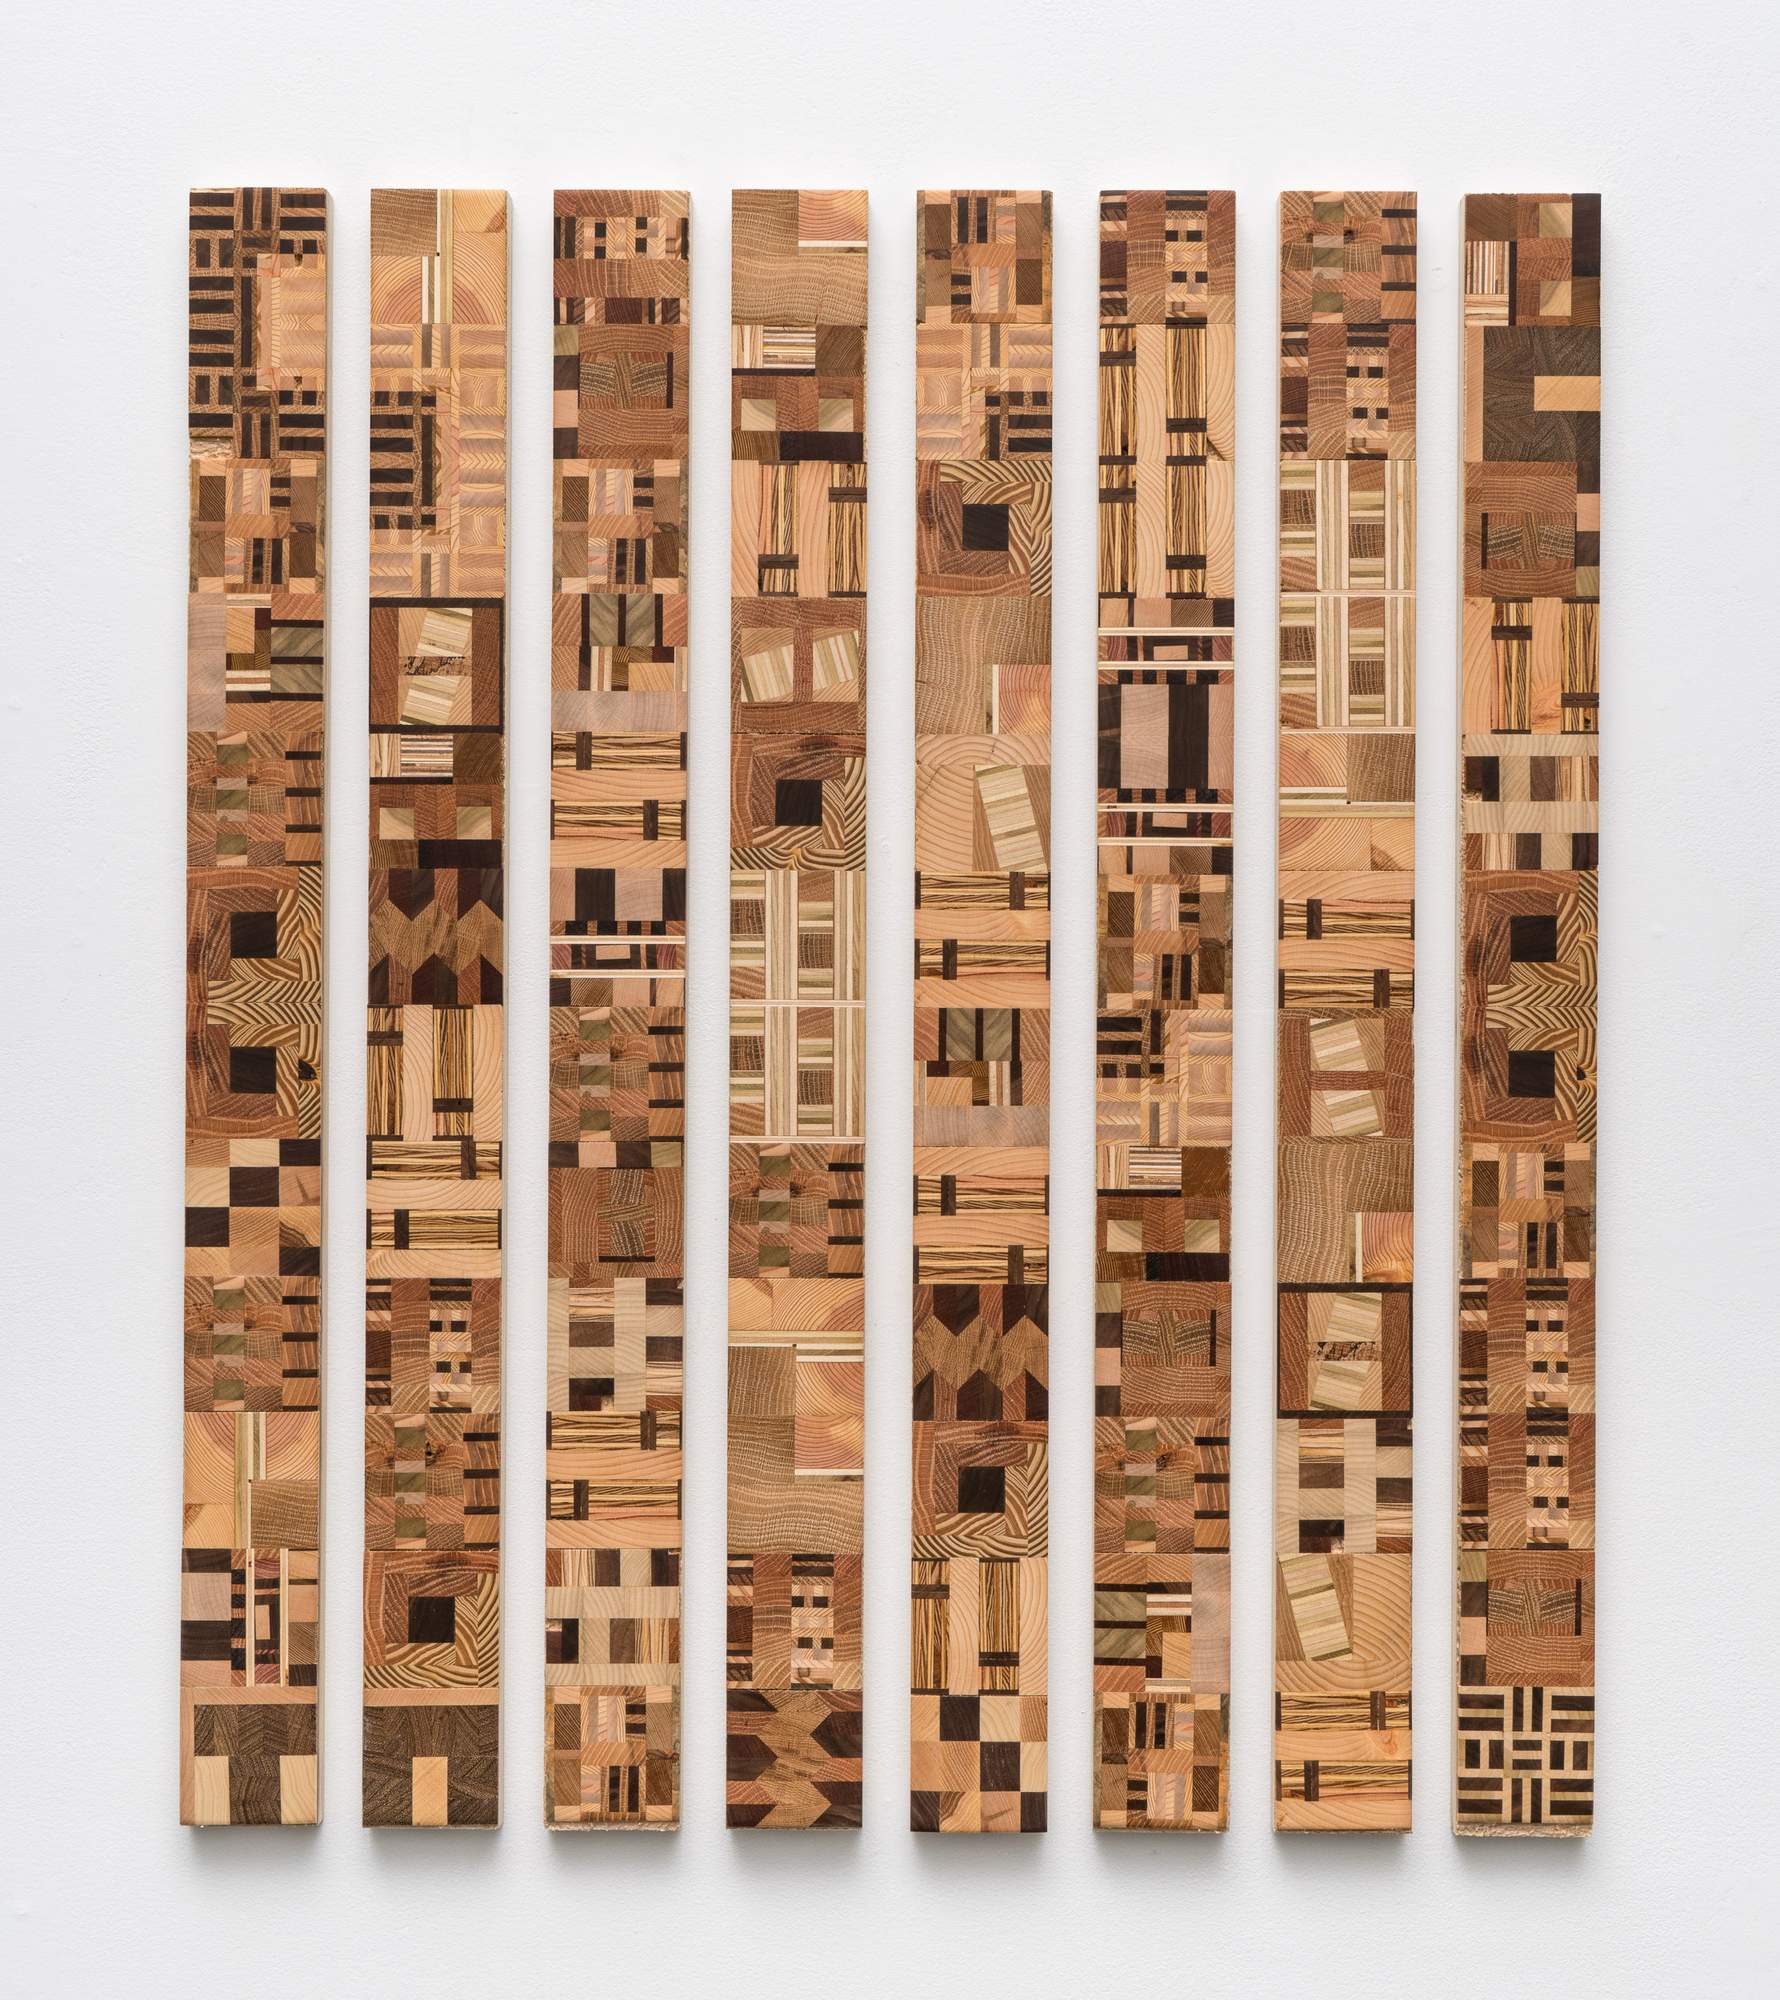 Preview image for Untitled (Wooden Kente Quilt 29)